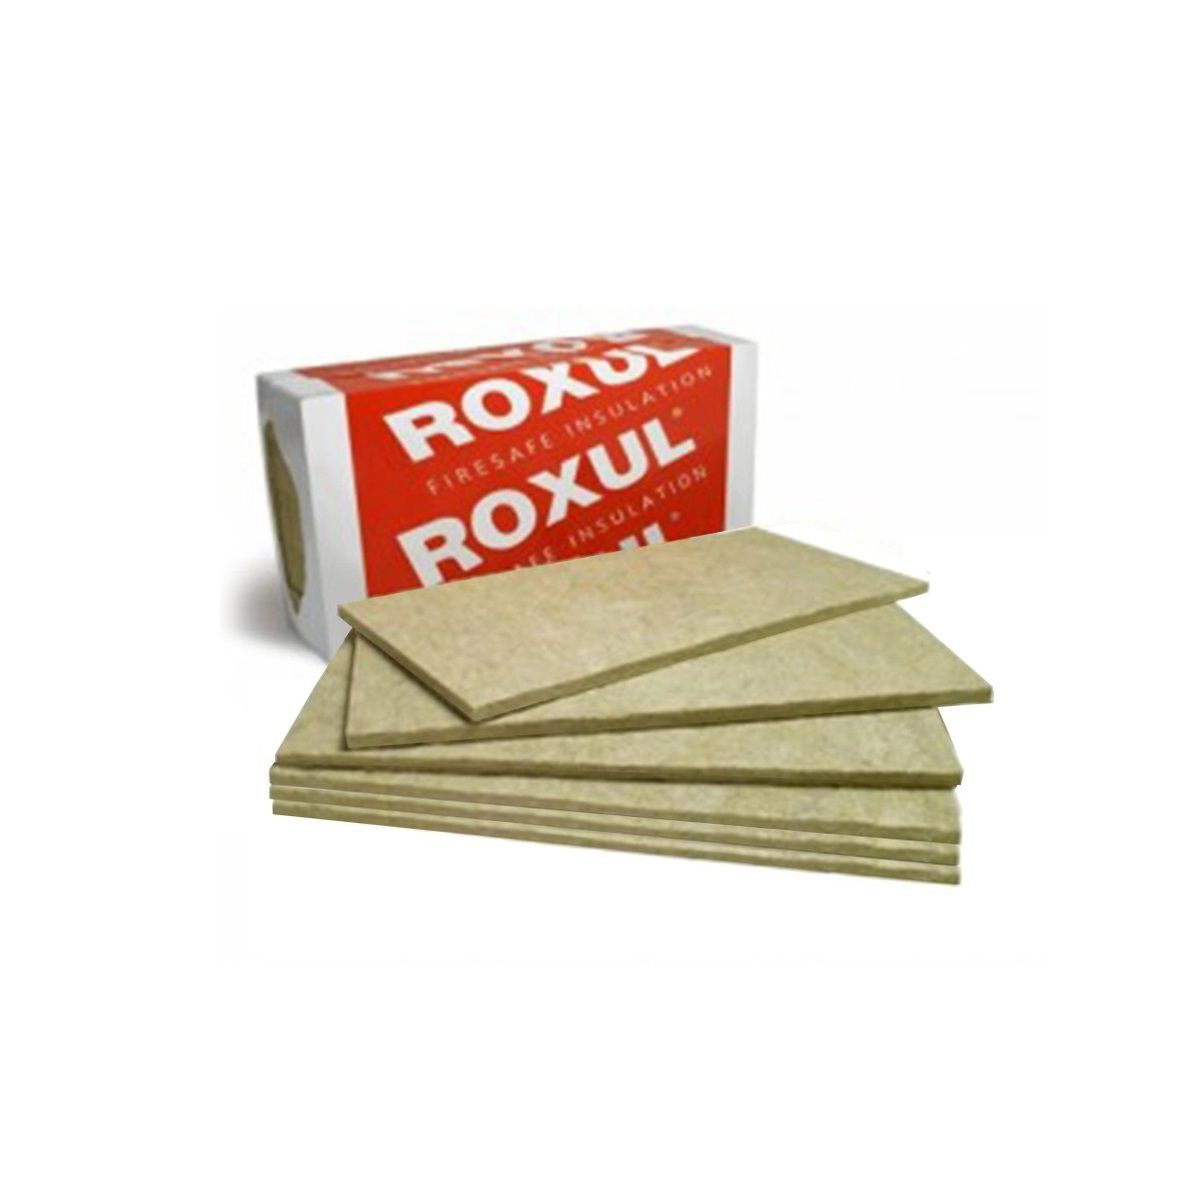 Roxul or Rockwool Fire Box Insulation- 1.5 inch thick- full bundle (7- 2x4 sheets)